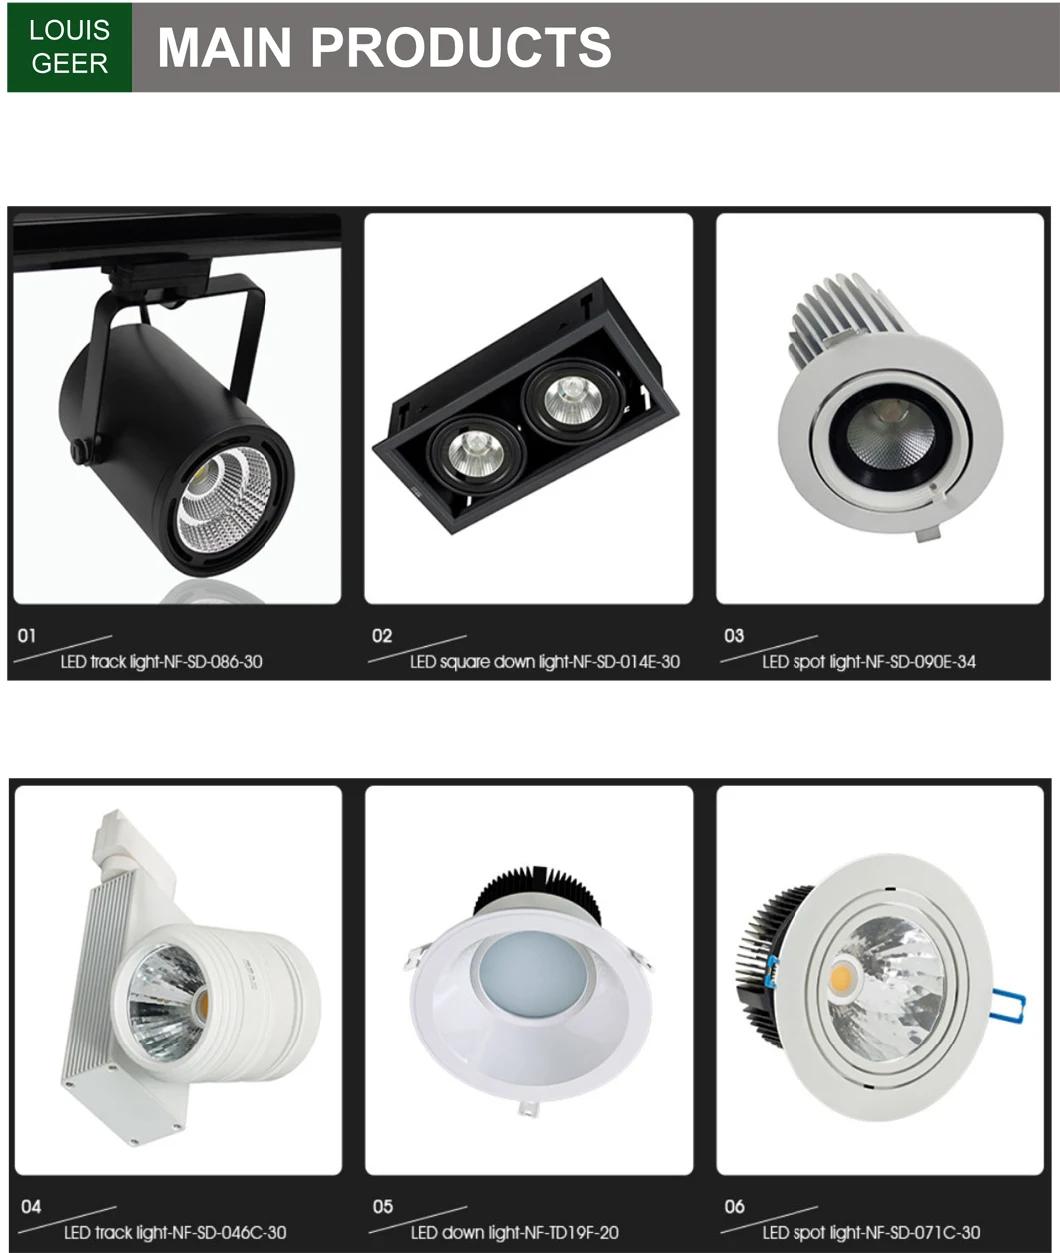 Indoor Showcase 20W Mini Track Lighting Project Source for Museum Gallery Art LED Bulb Lamp